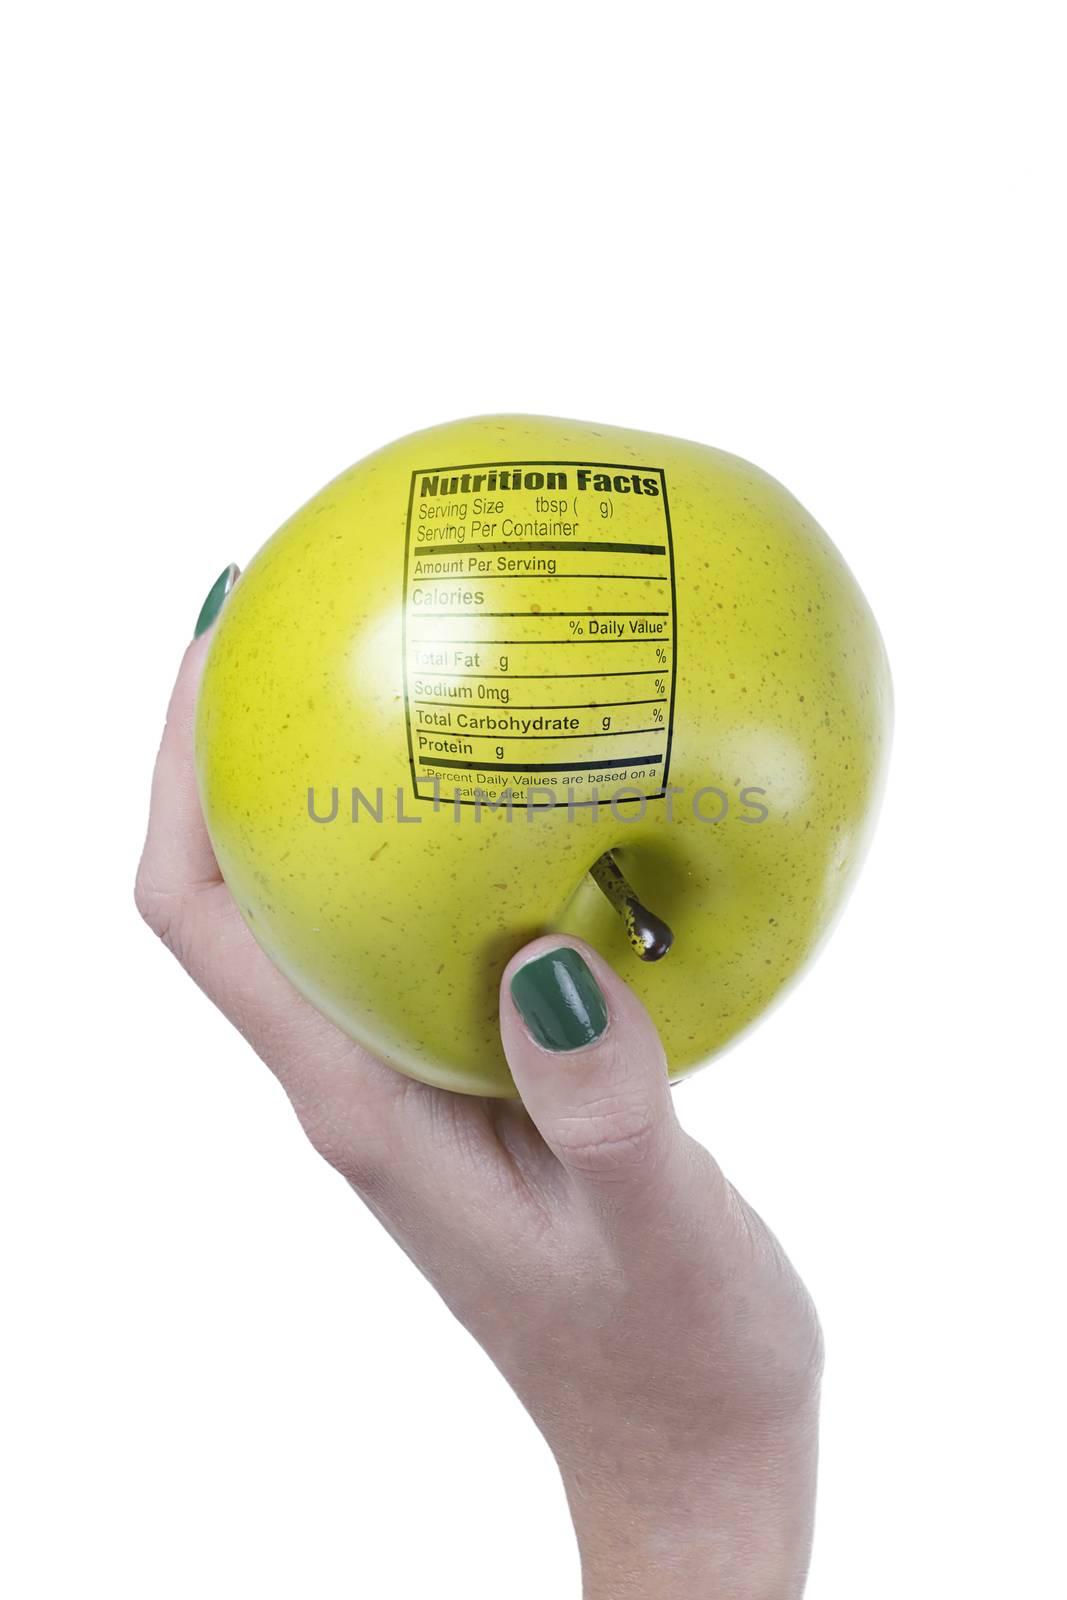 Apple with nutrition facts label by VIPDesignUSA